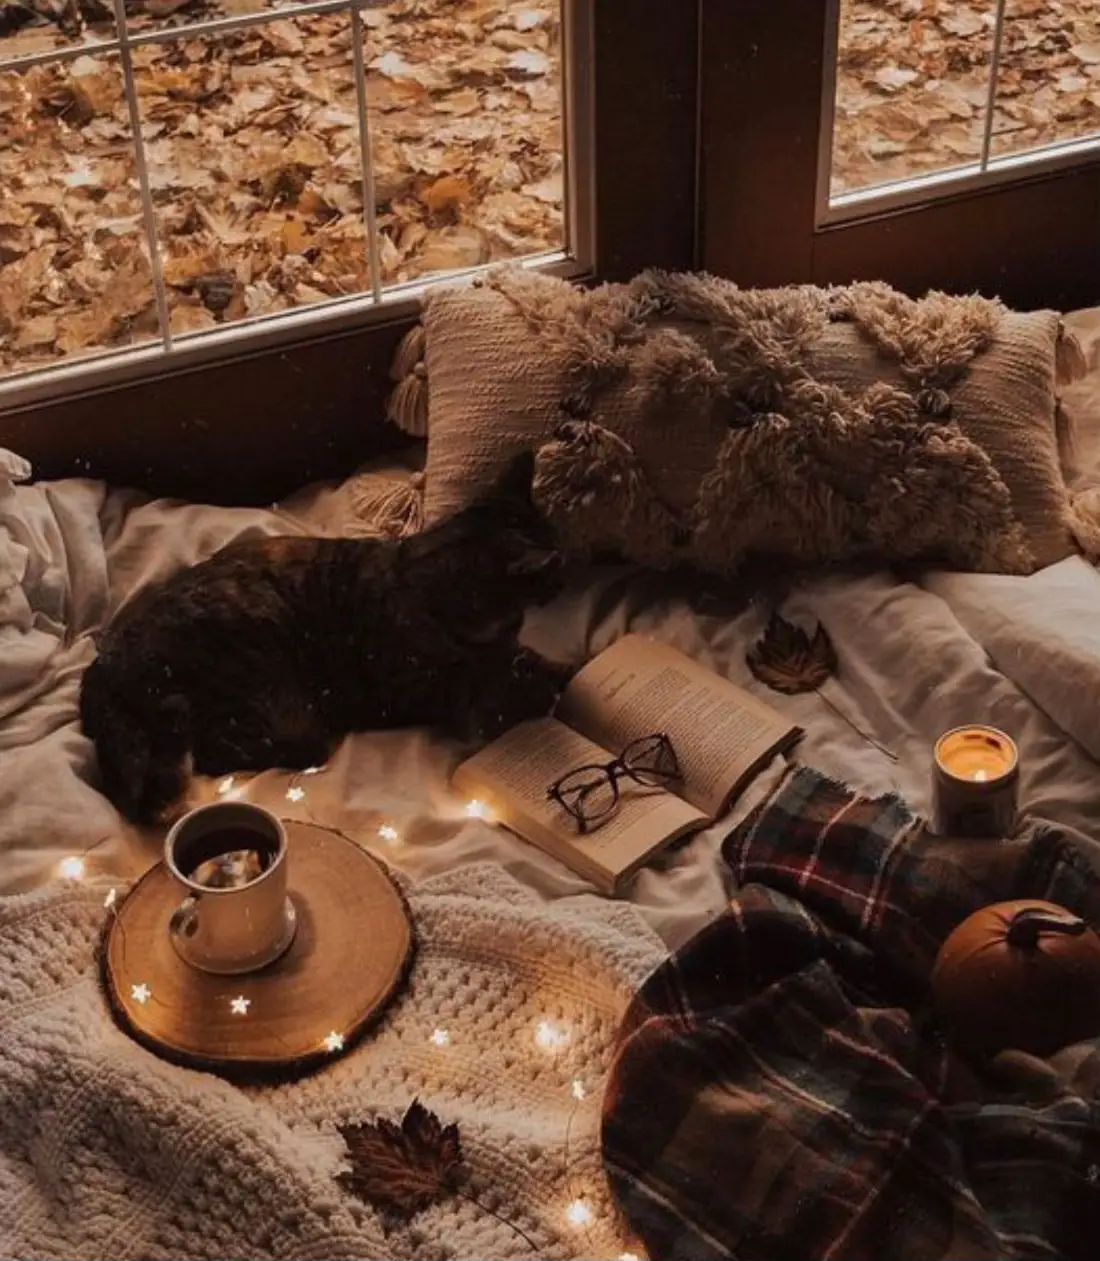 How to give your home: cozy autumn vibes 🍁 